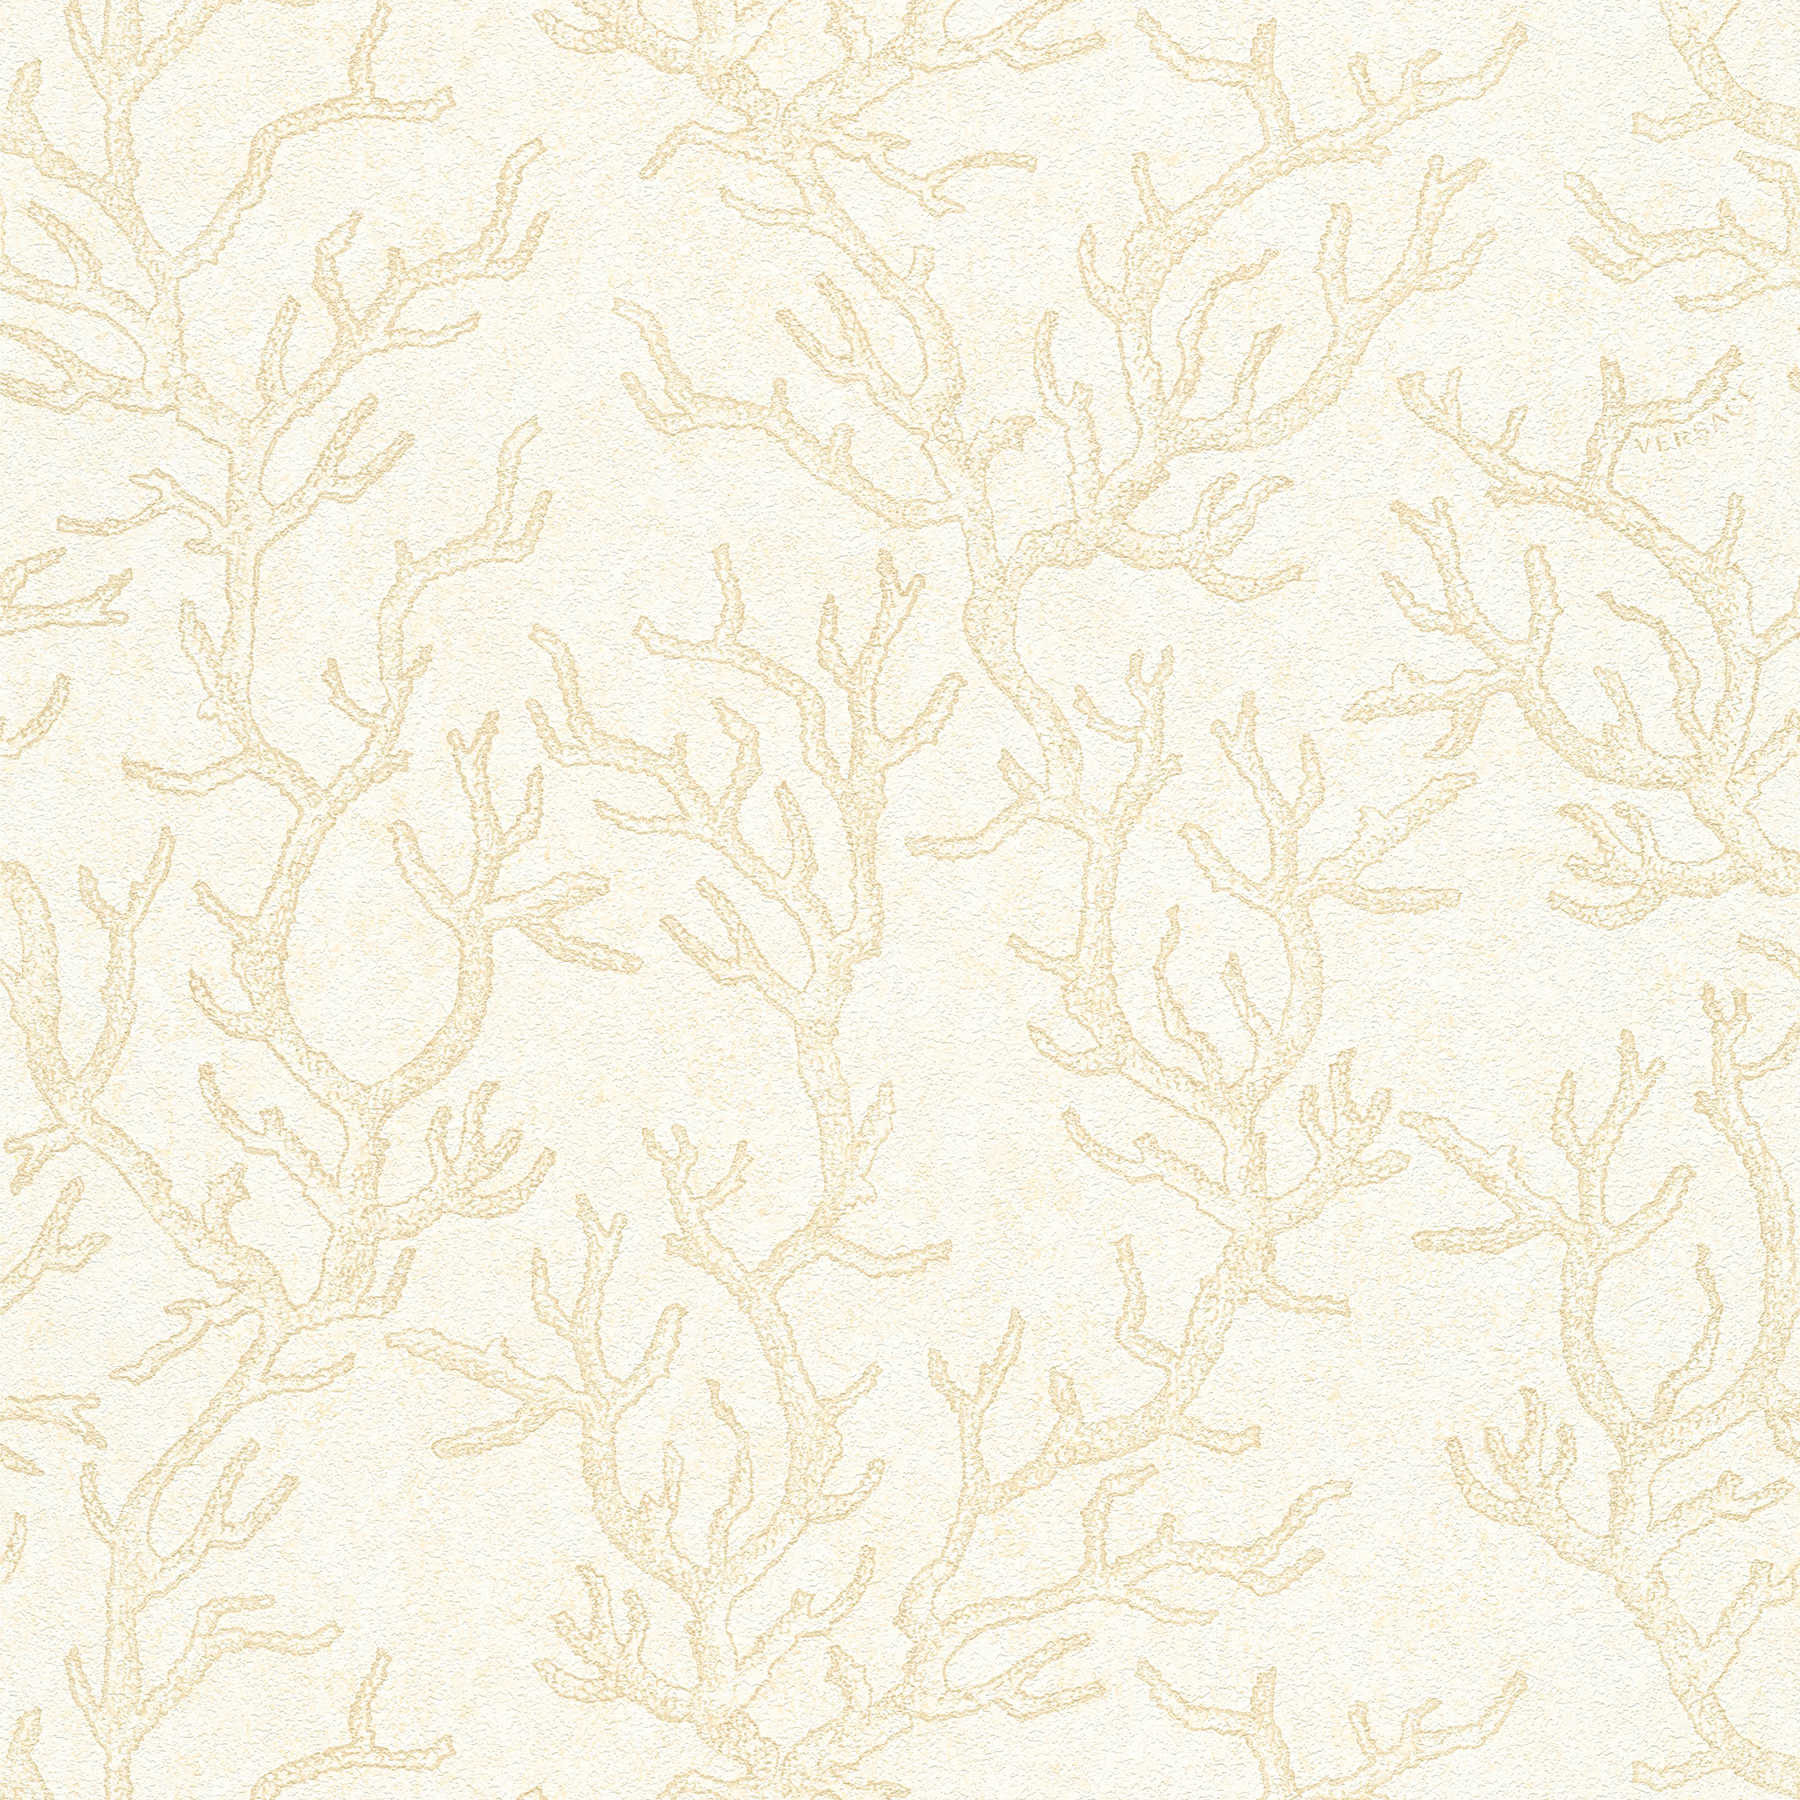 VERSACE wallpaper with coral & gold effect - cream, metallic
